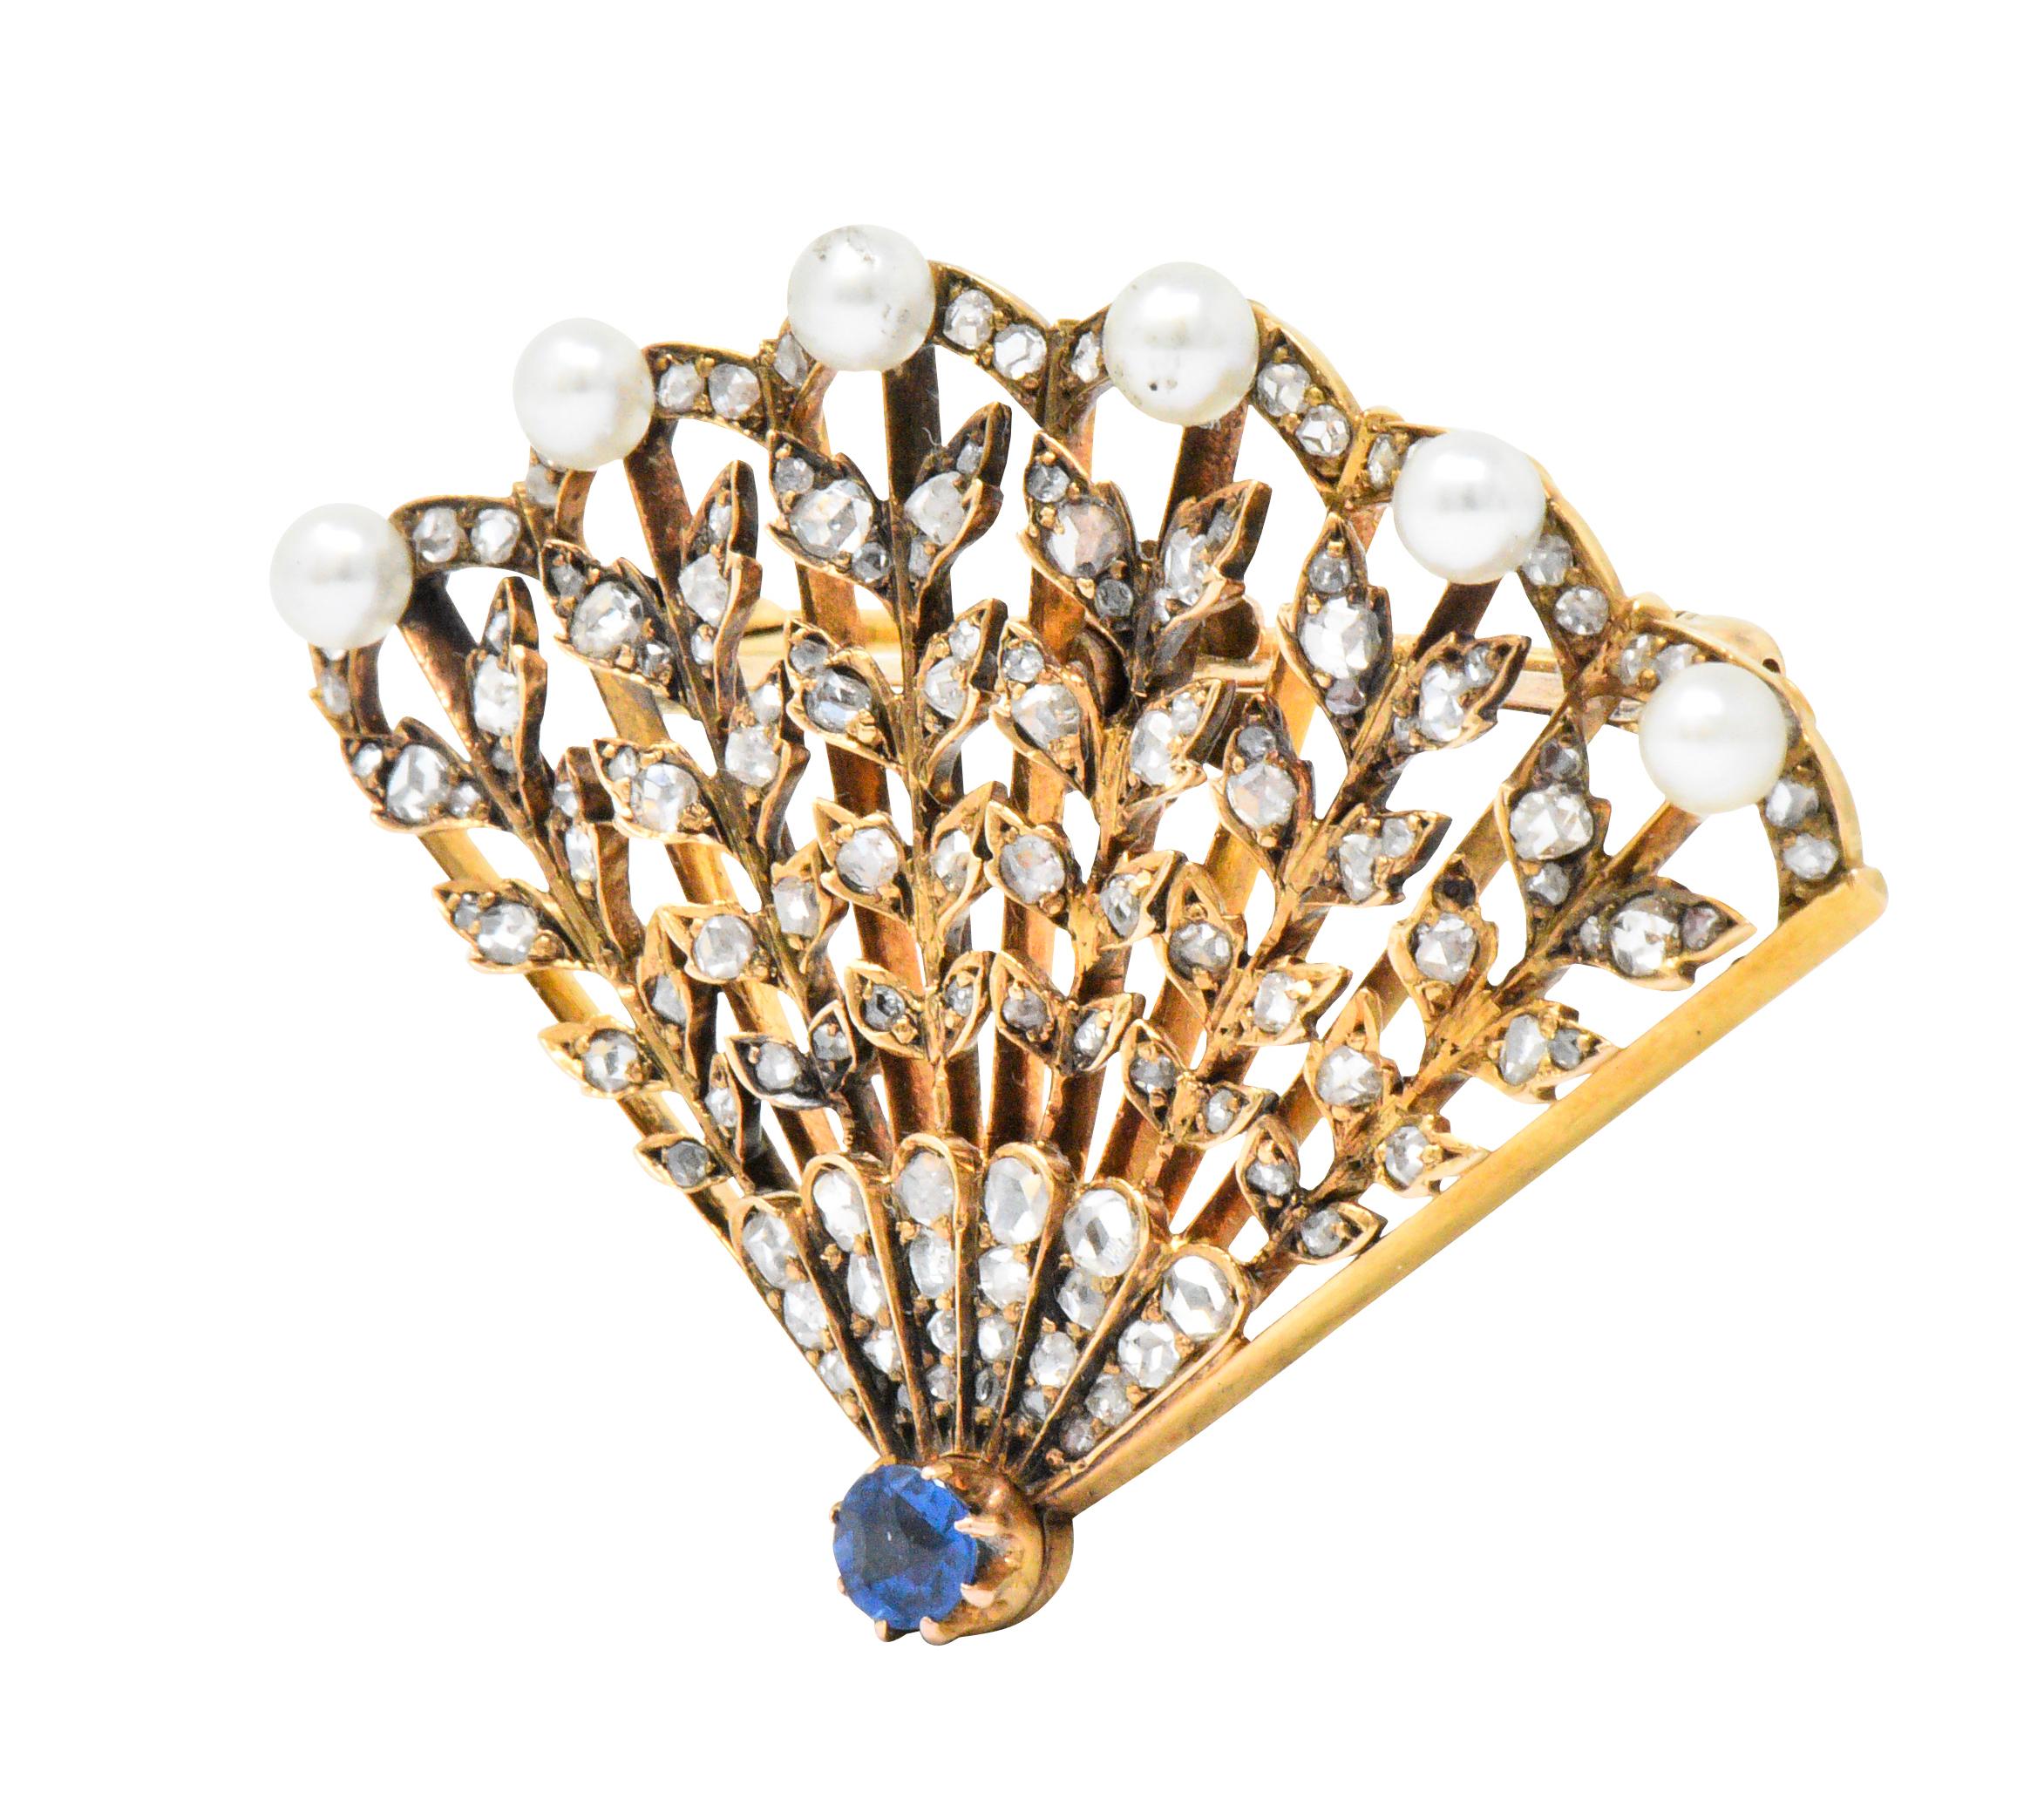 Designed as an open-work fan, set with rose cut diamonds, weighing approximately 1.50 carats total, eye-clean and white

Terminating in a round cut sapphire, weighing approximately 0.25 carats, vivid blue

Beautiful natural pearl accents, white with